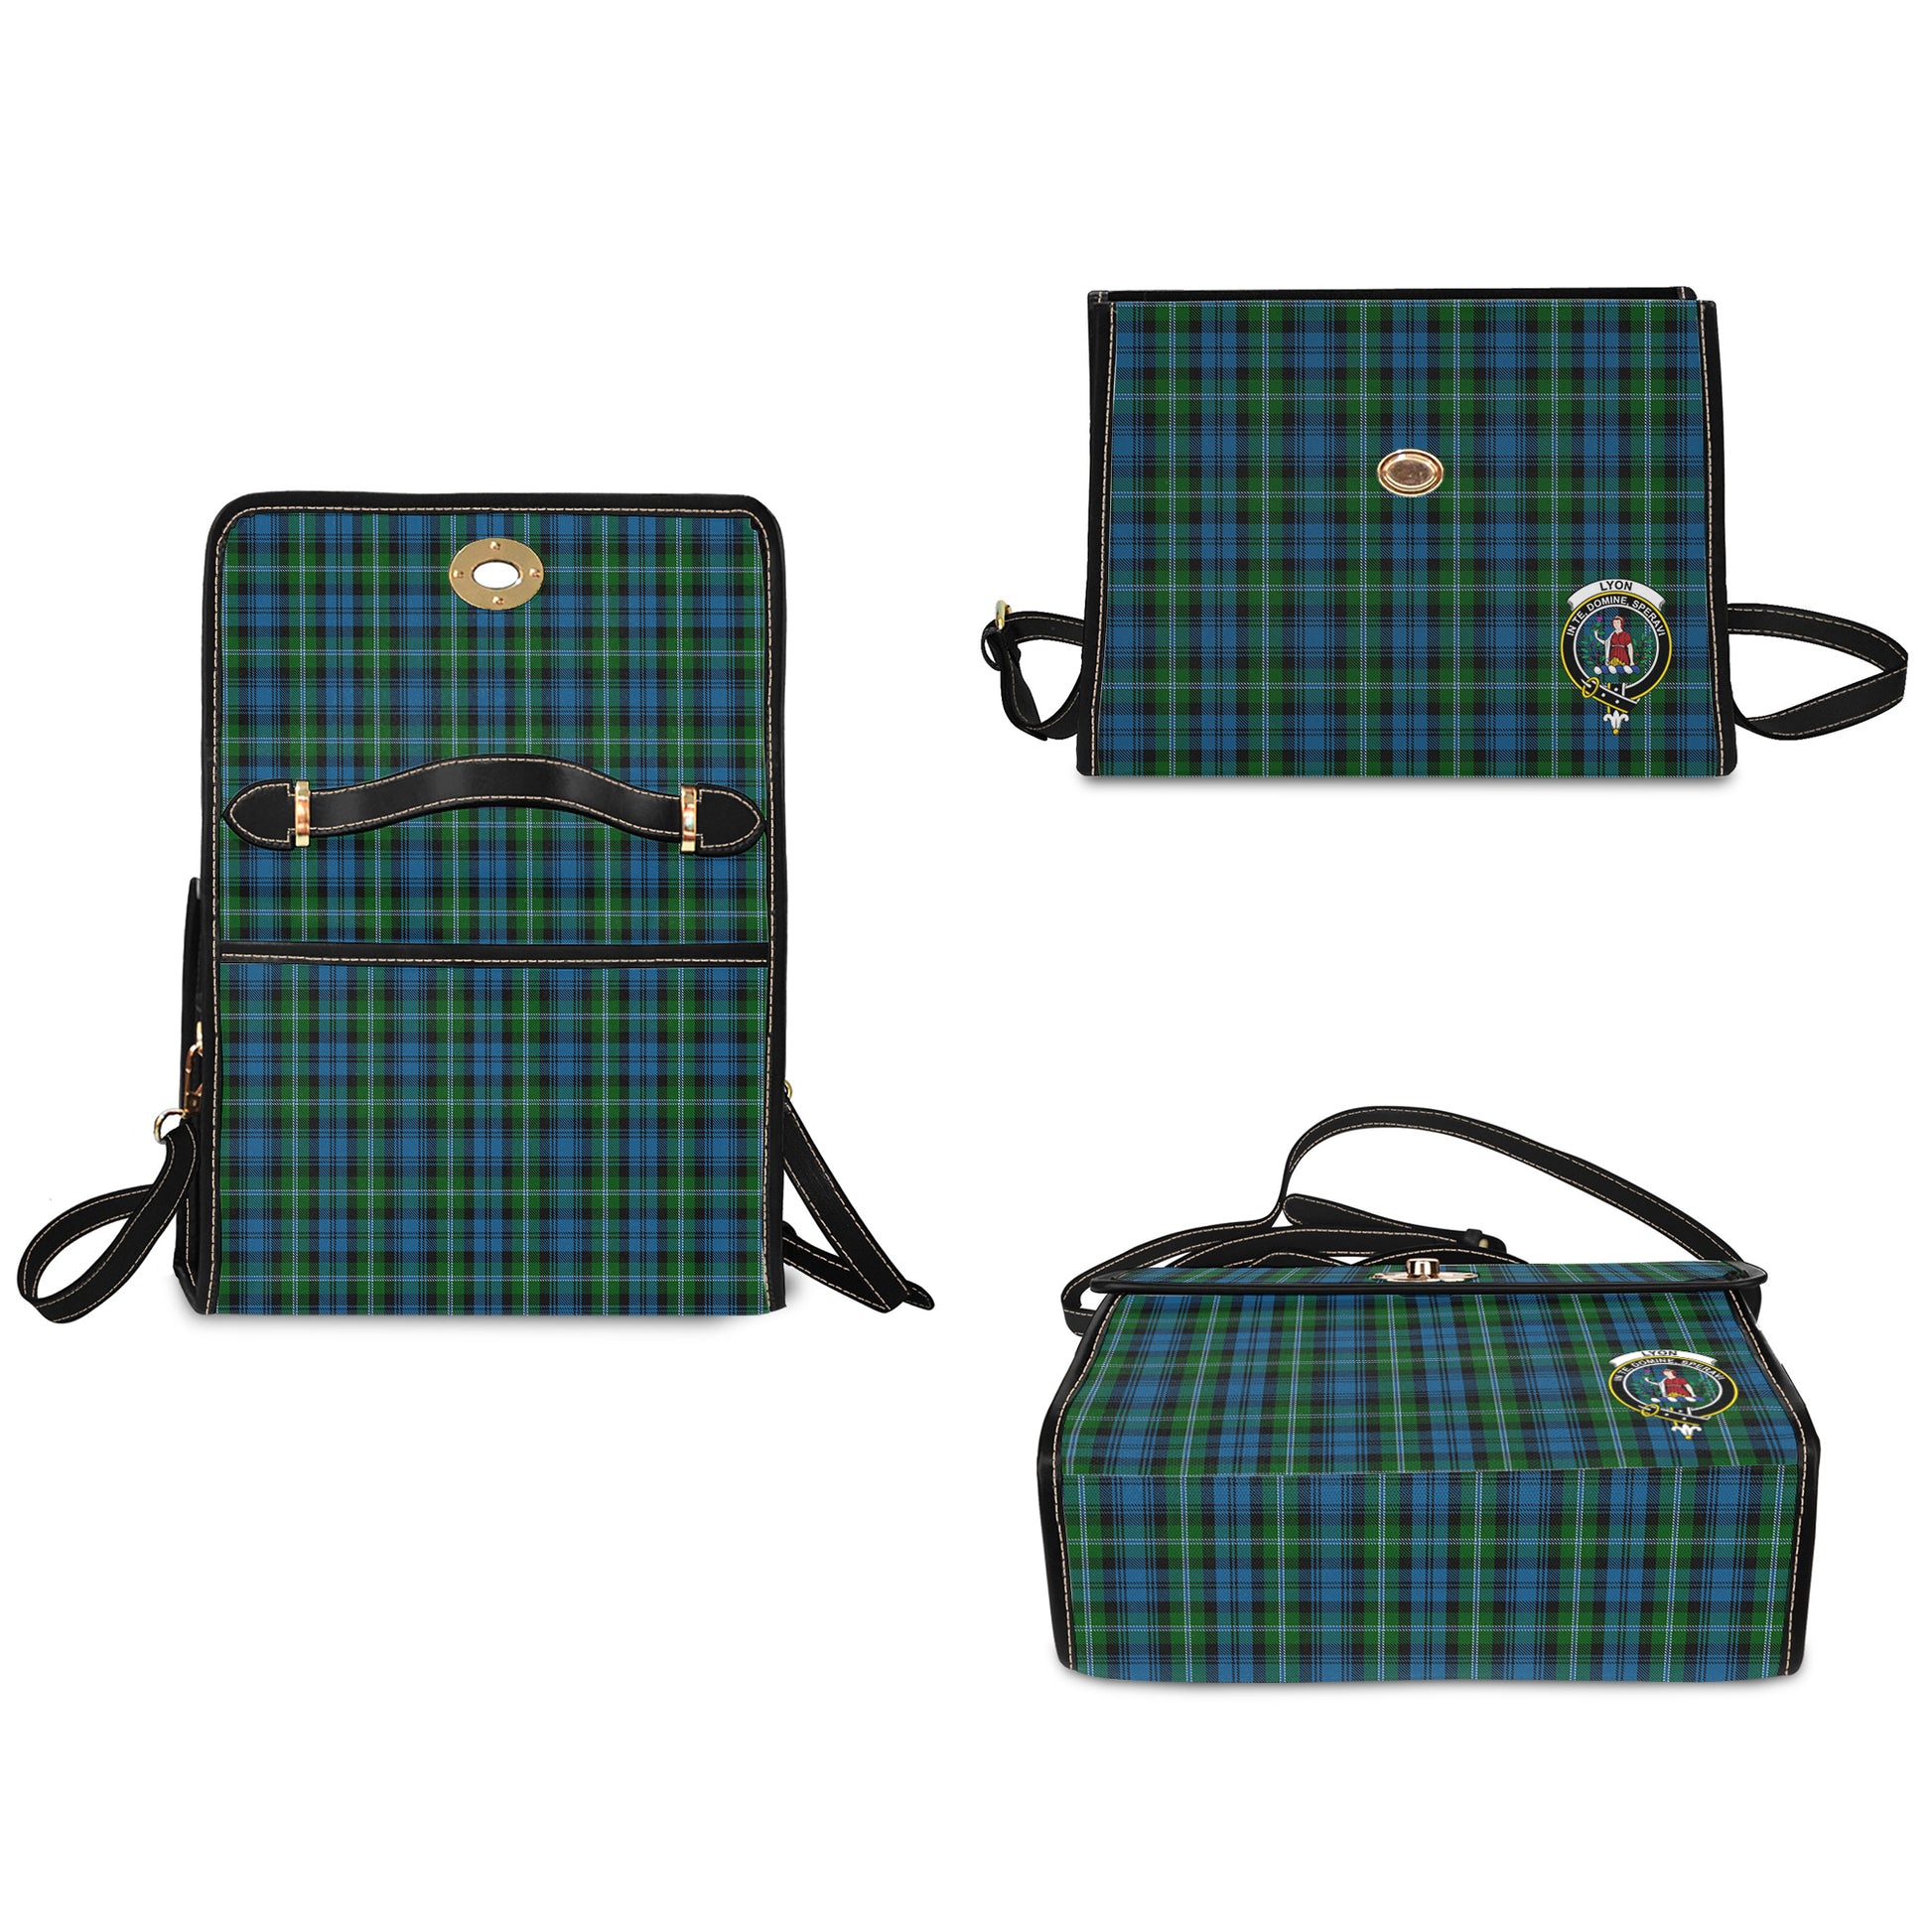 lyon-tartan-leather-strap-waterproof-canvas-bag-with-family-crest